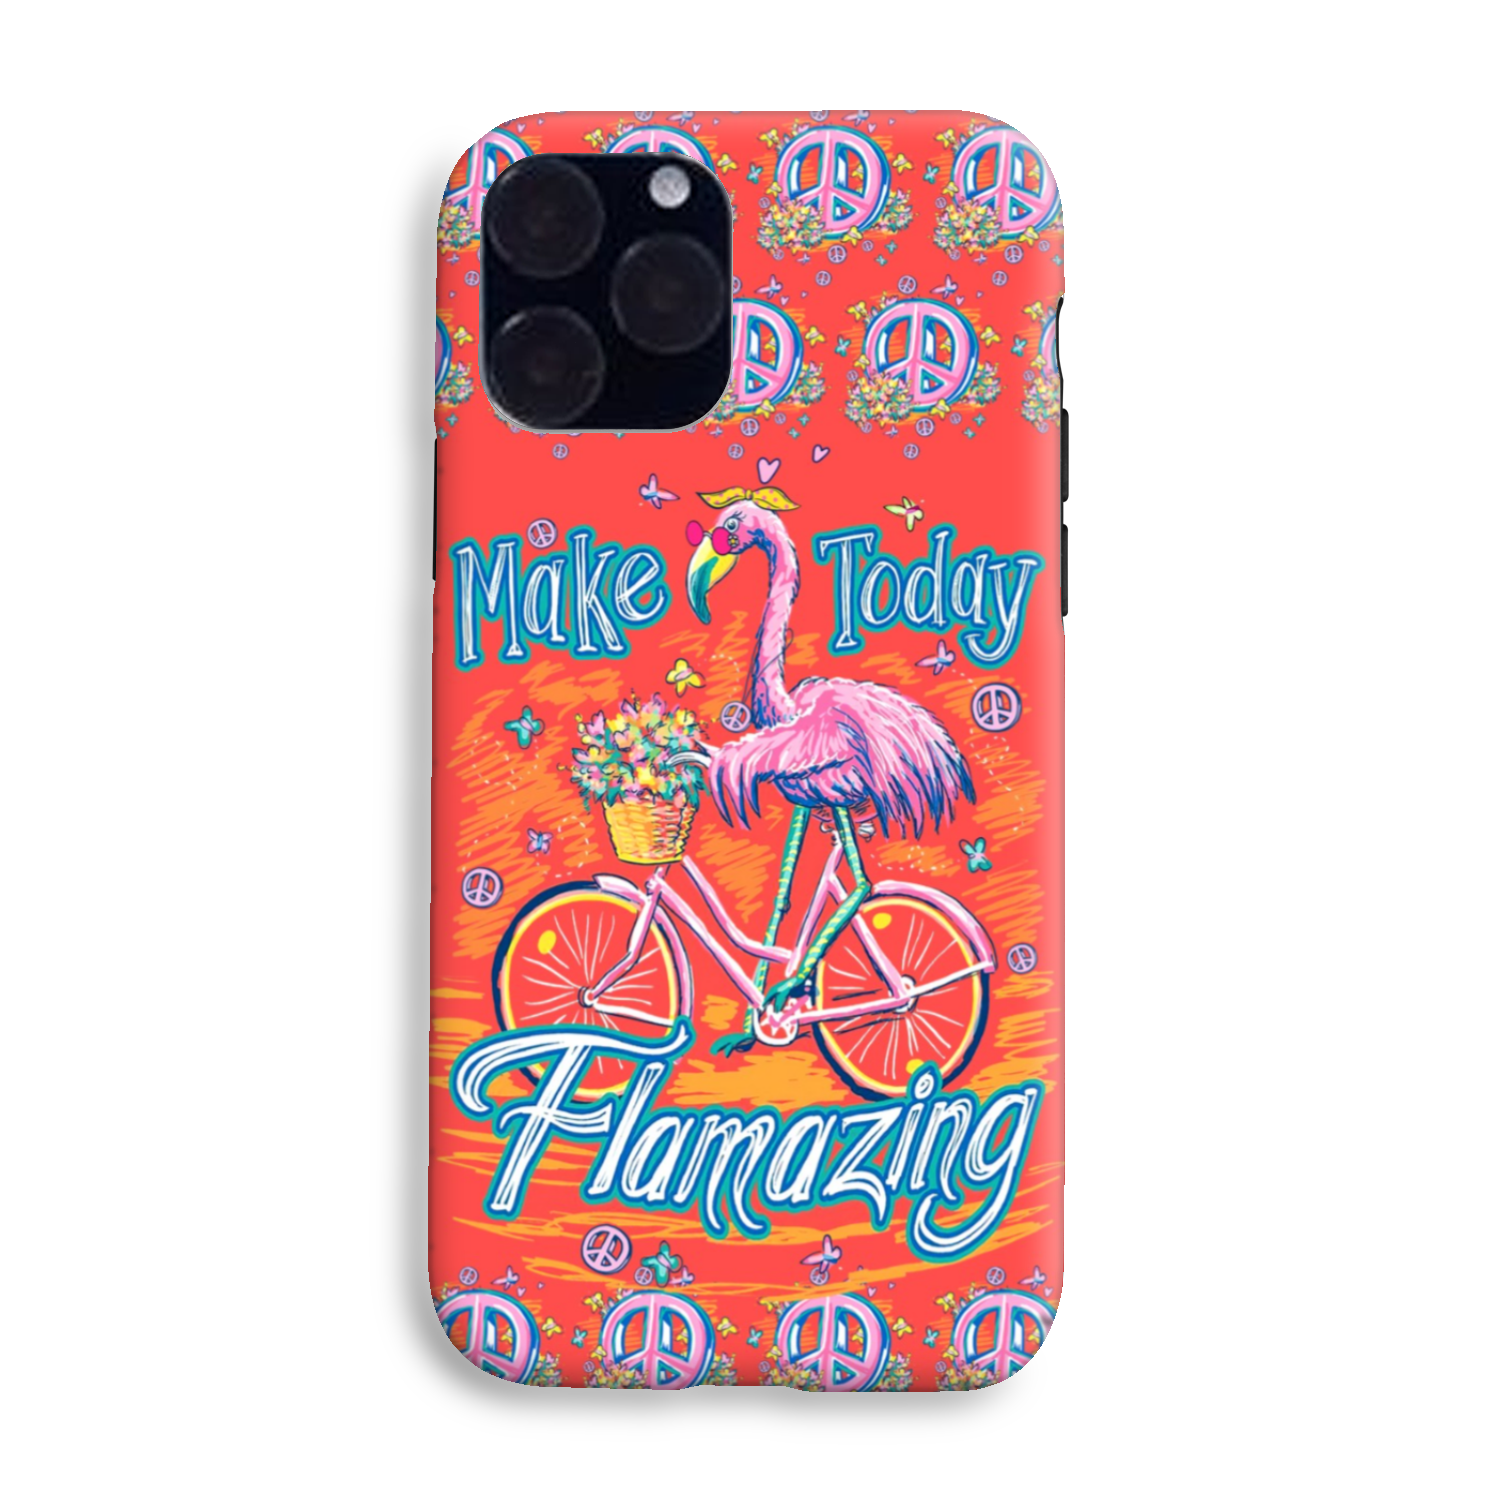 MAKE TODAY FLAMAZING PHONE CASE - TY0206232